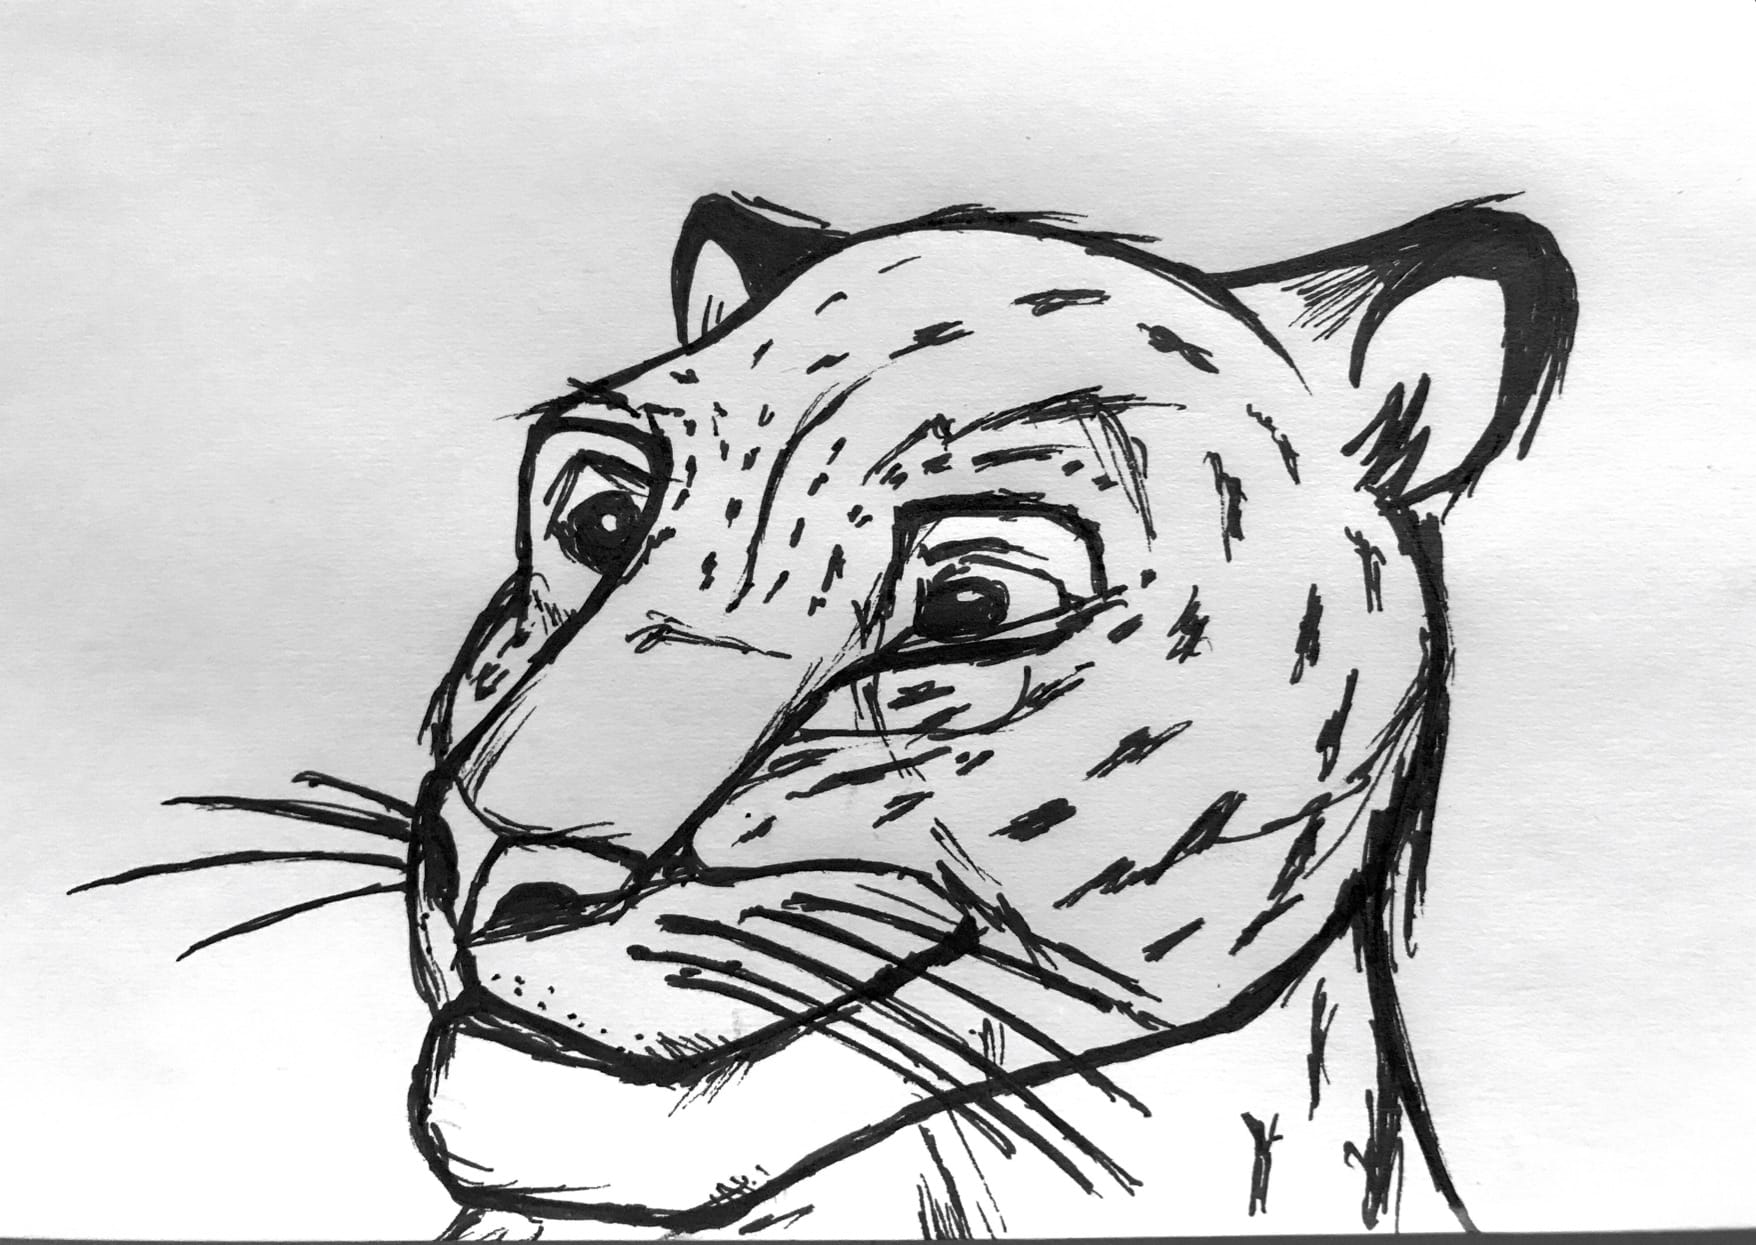 Sketch / comic drawing of a leopard’s head and face